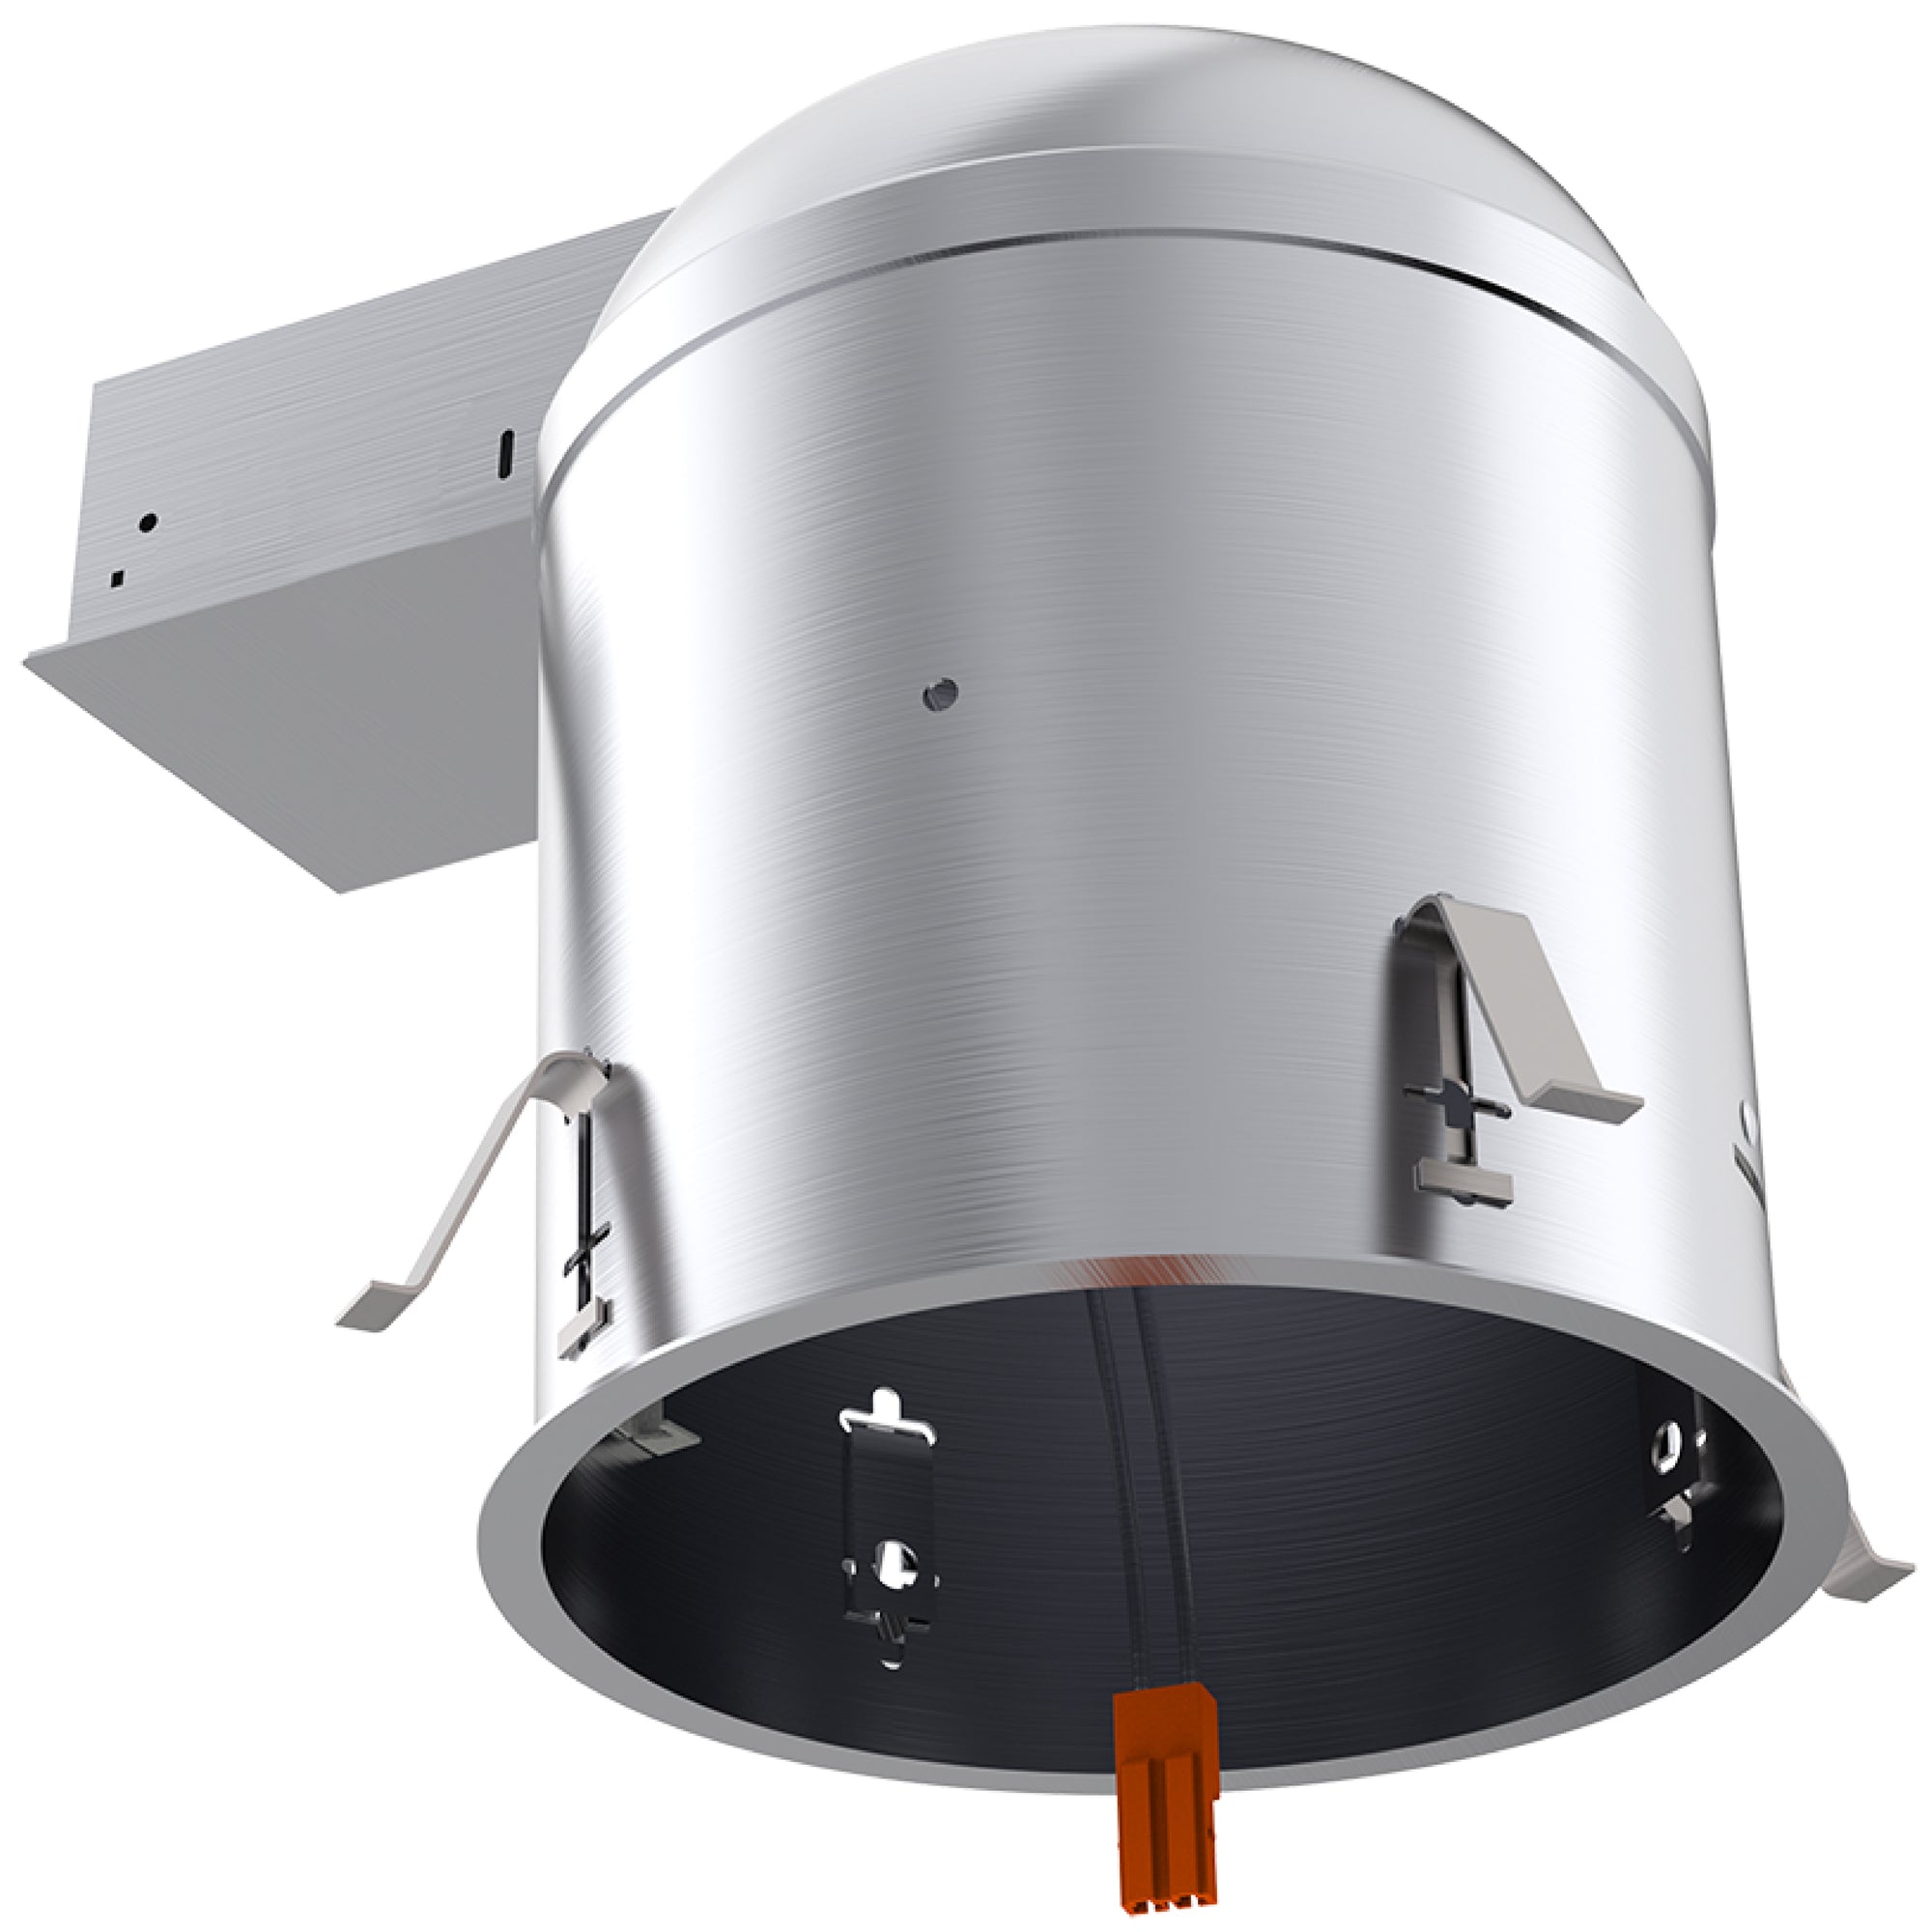 Sunco airtight and IC Rated 6-inch remodel cans accept LED retrofit downlights (sold separately) with the included TP24 connector. In this image the connected junction box, flexible conduit, TP24 connector, and mount clips are visible. The remodeling or mount clips push from inside the can to secure the can to the ceiling. Running on 120/277V, this can helps you remodel finished ceilings with downlight without tearing up your ceilings. Bulk Buyer Options Available!